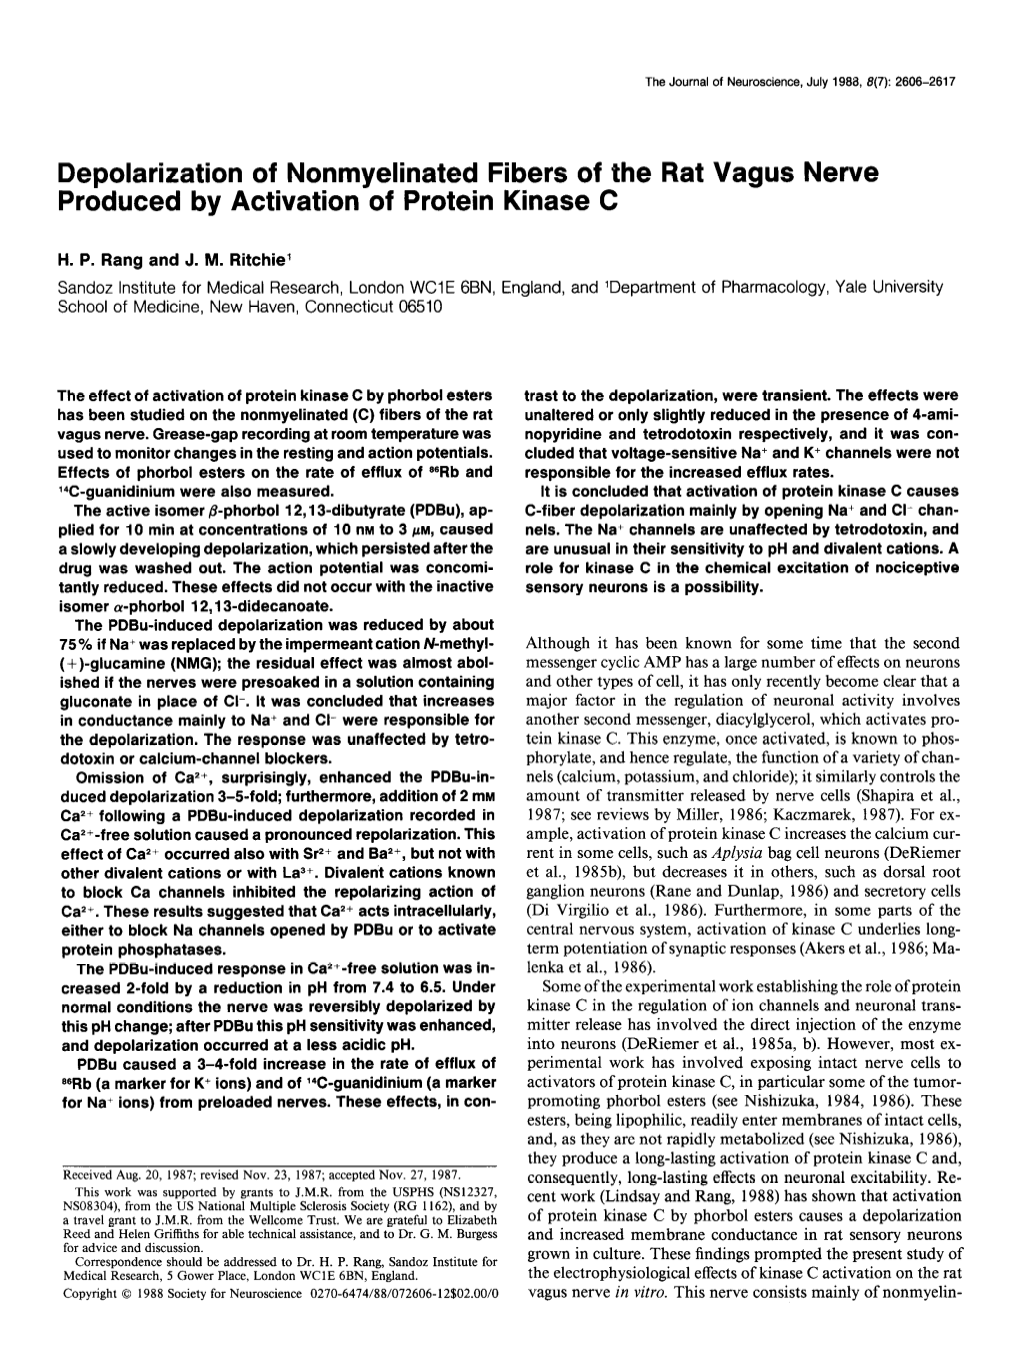 Depolarization of Nonmyelinated Fibers of the Rat Vagus Nerve Produced by Activation of Protein Kinase C